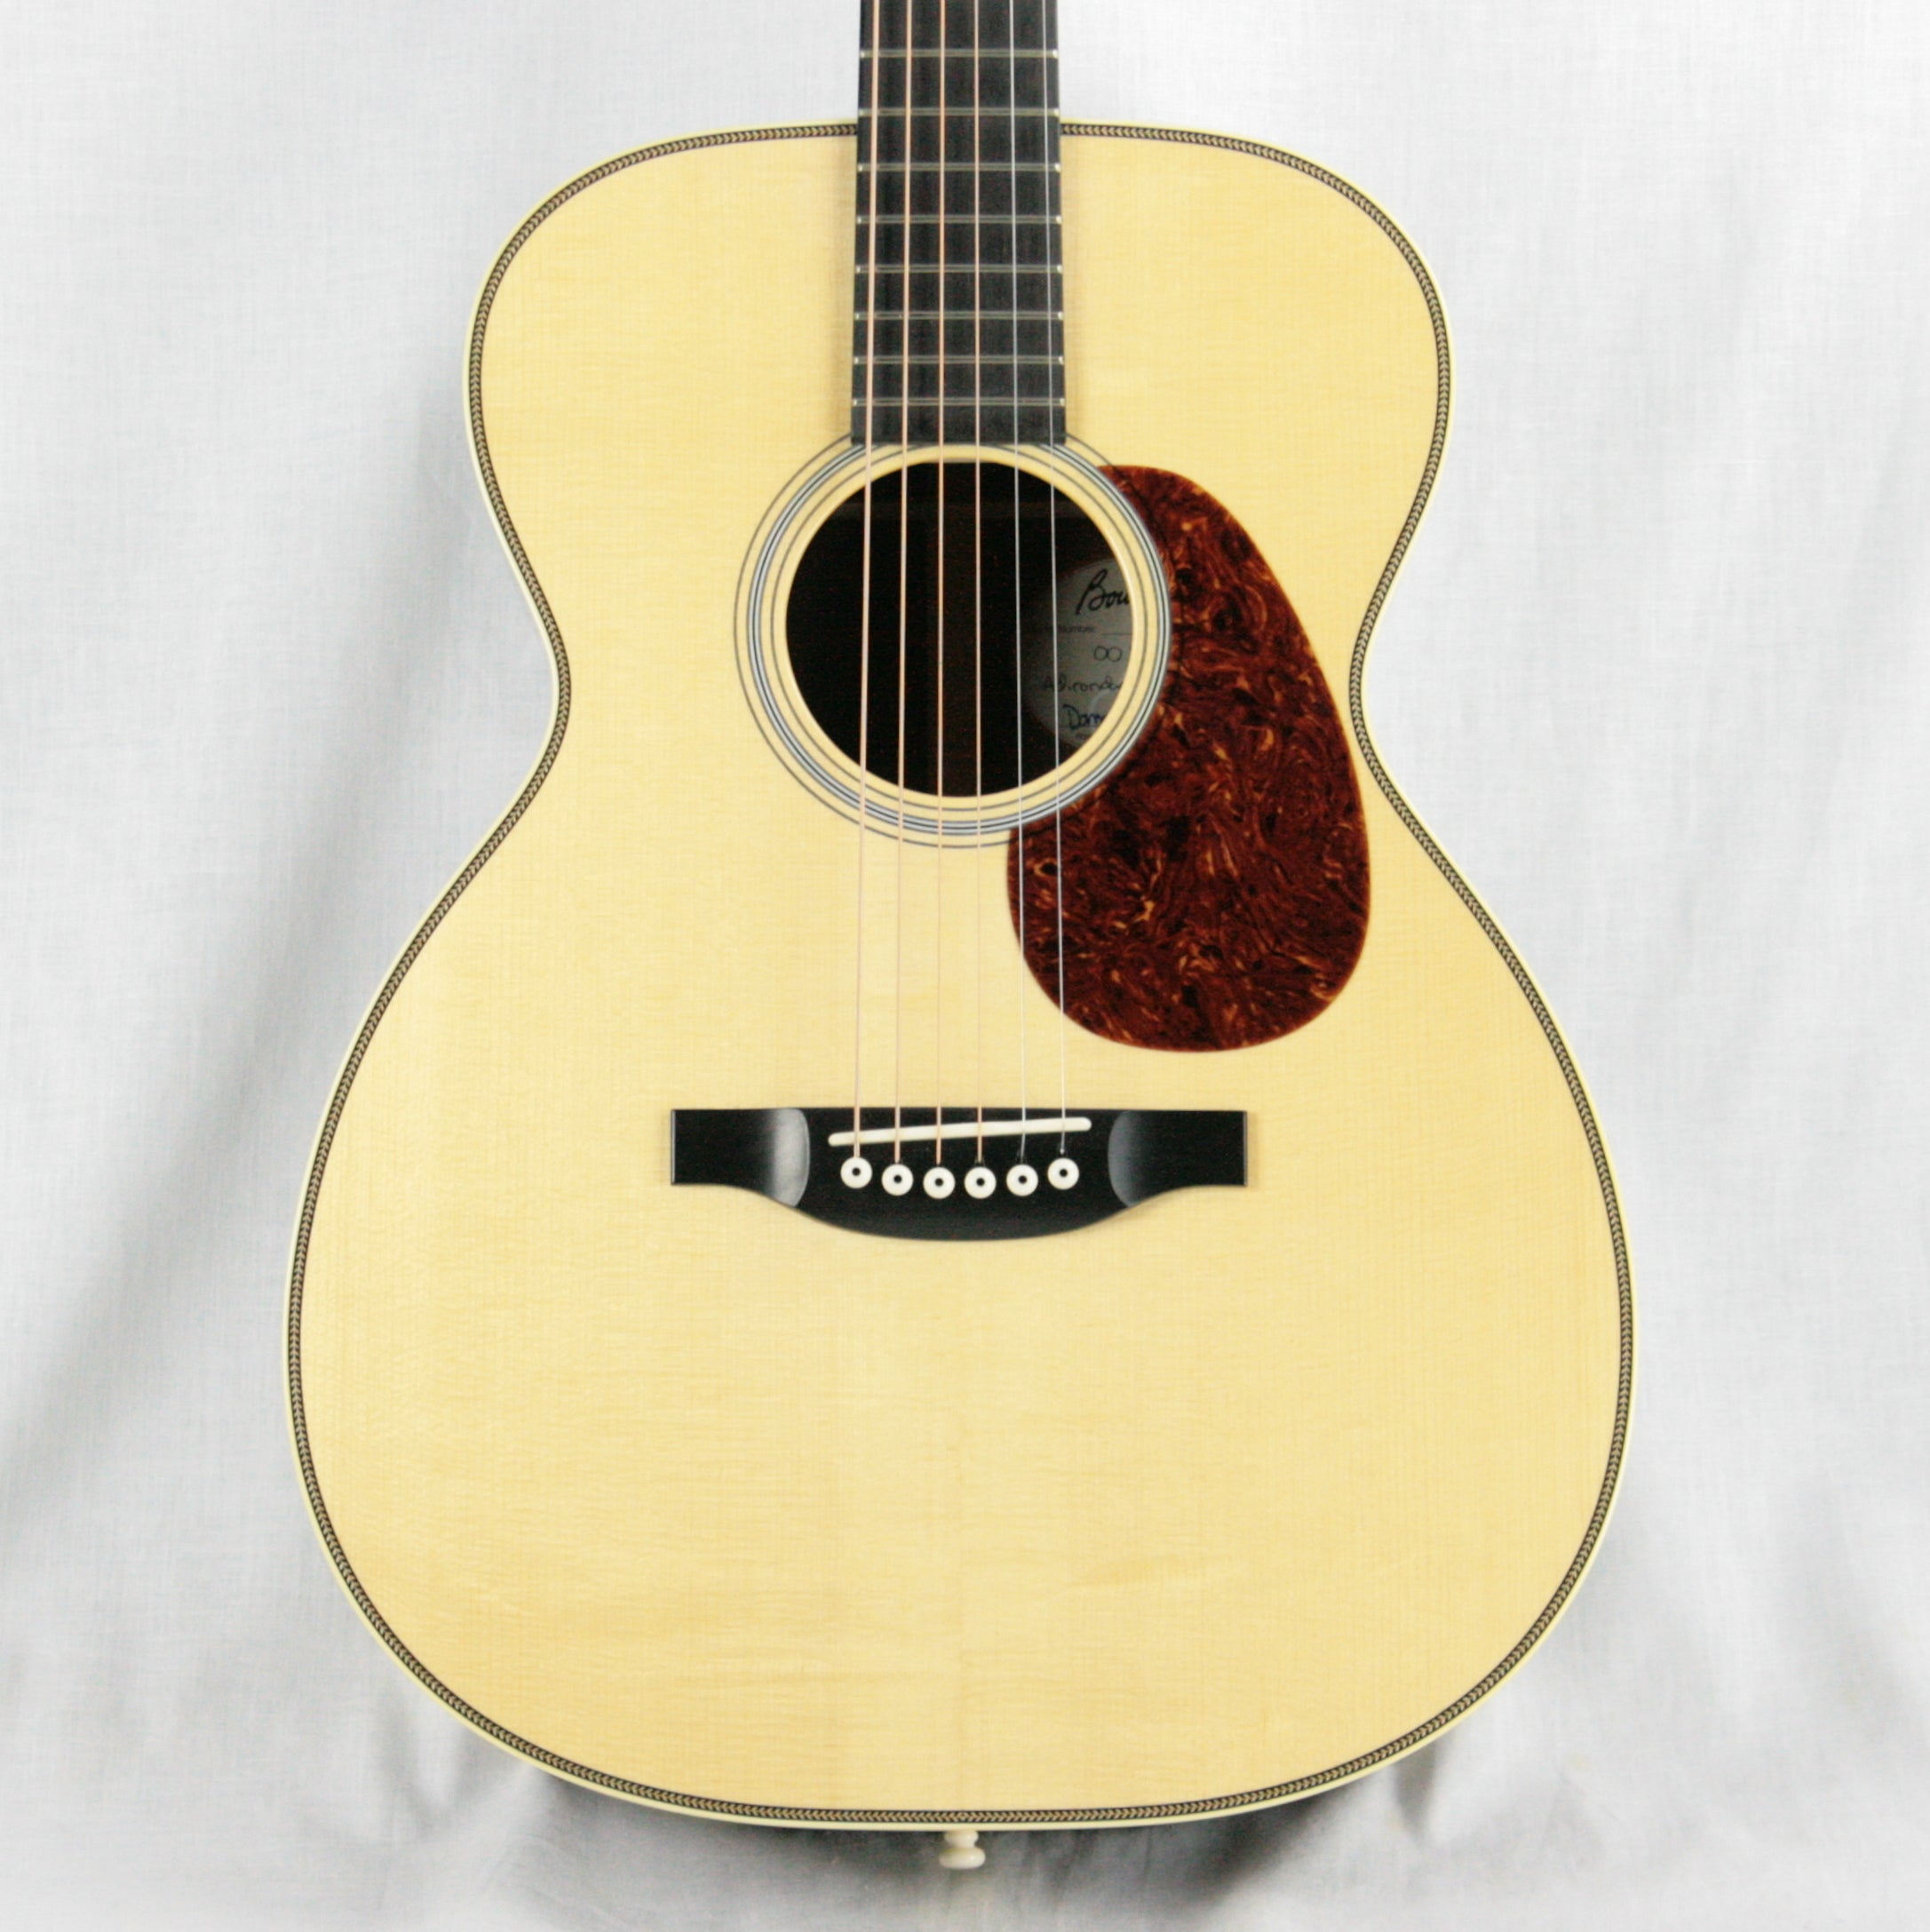 Bourgeois OM acoustic guitar